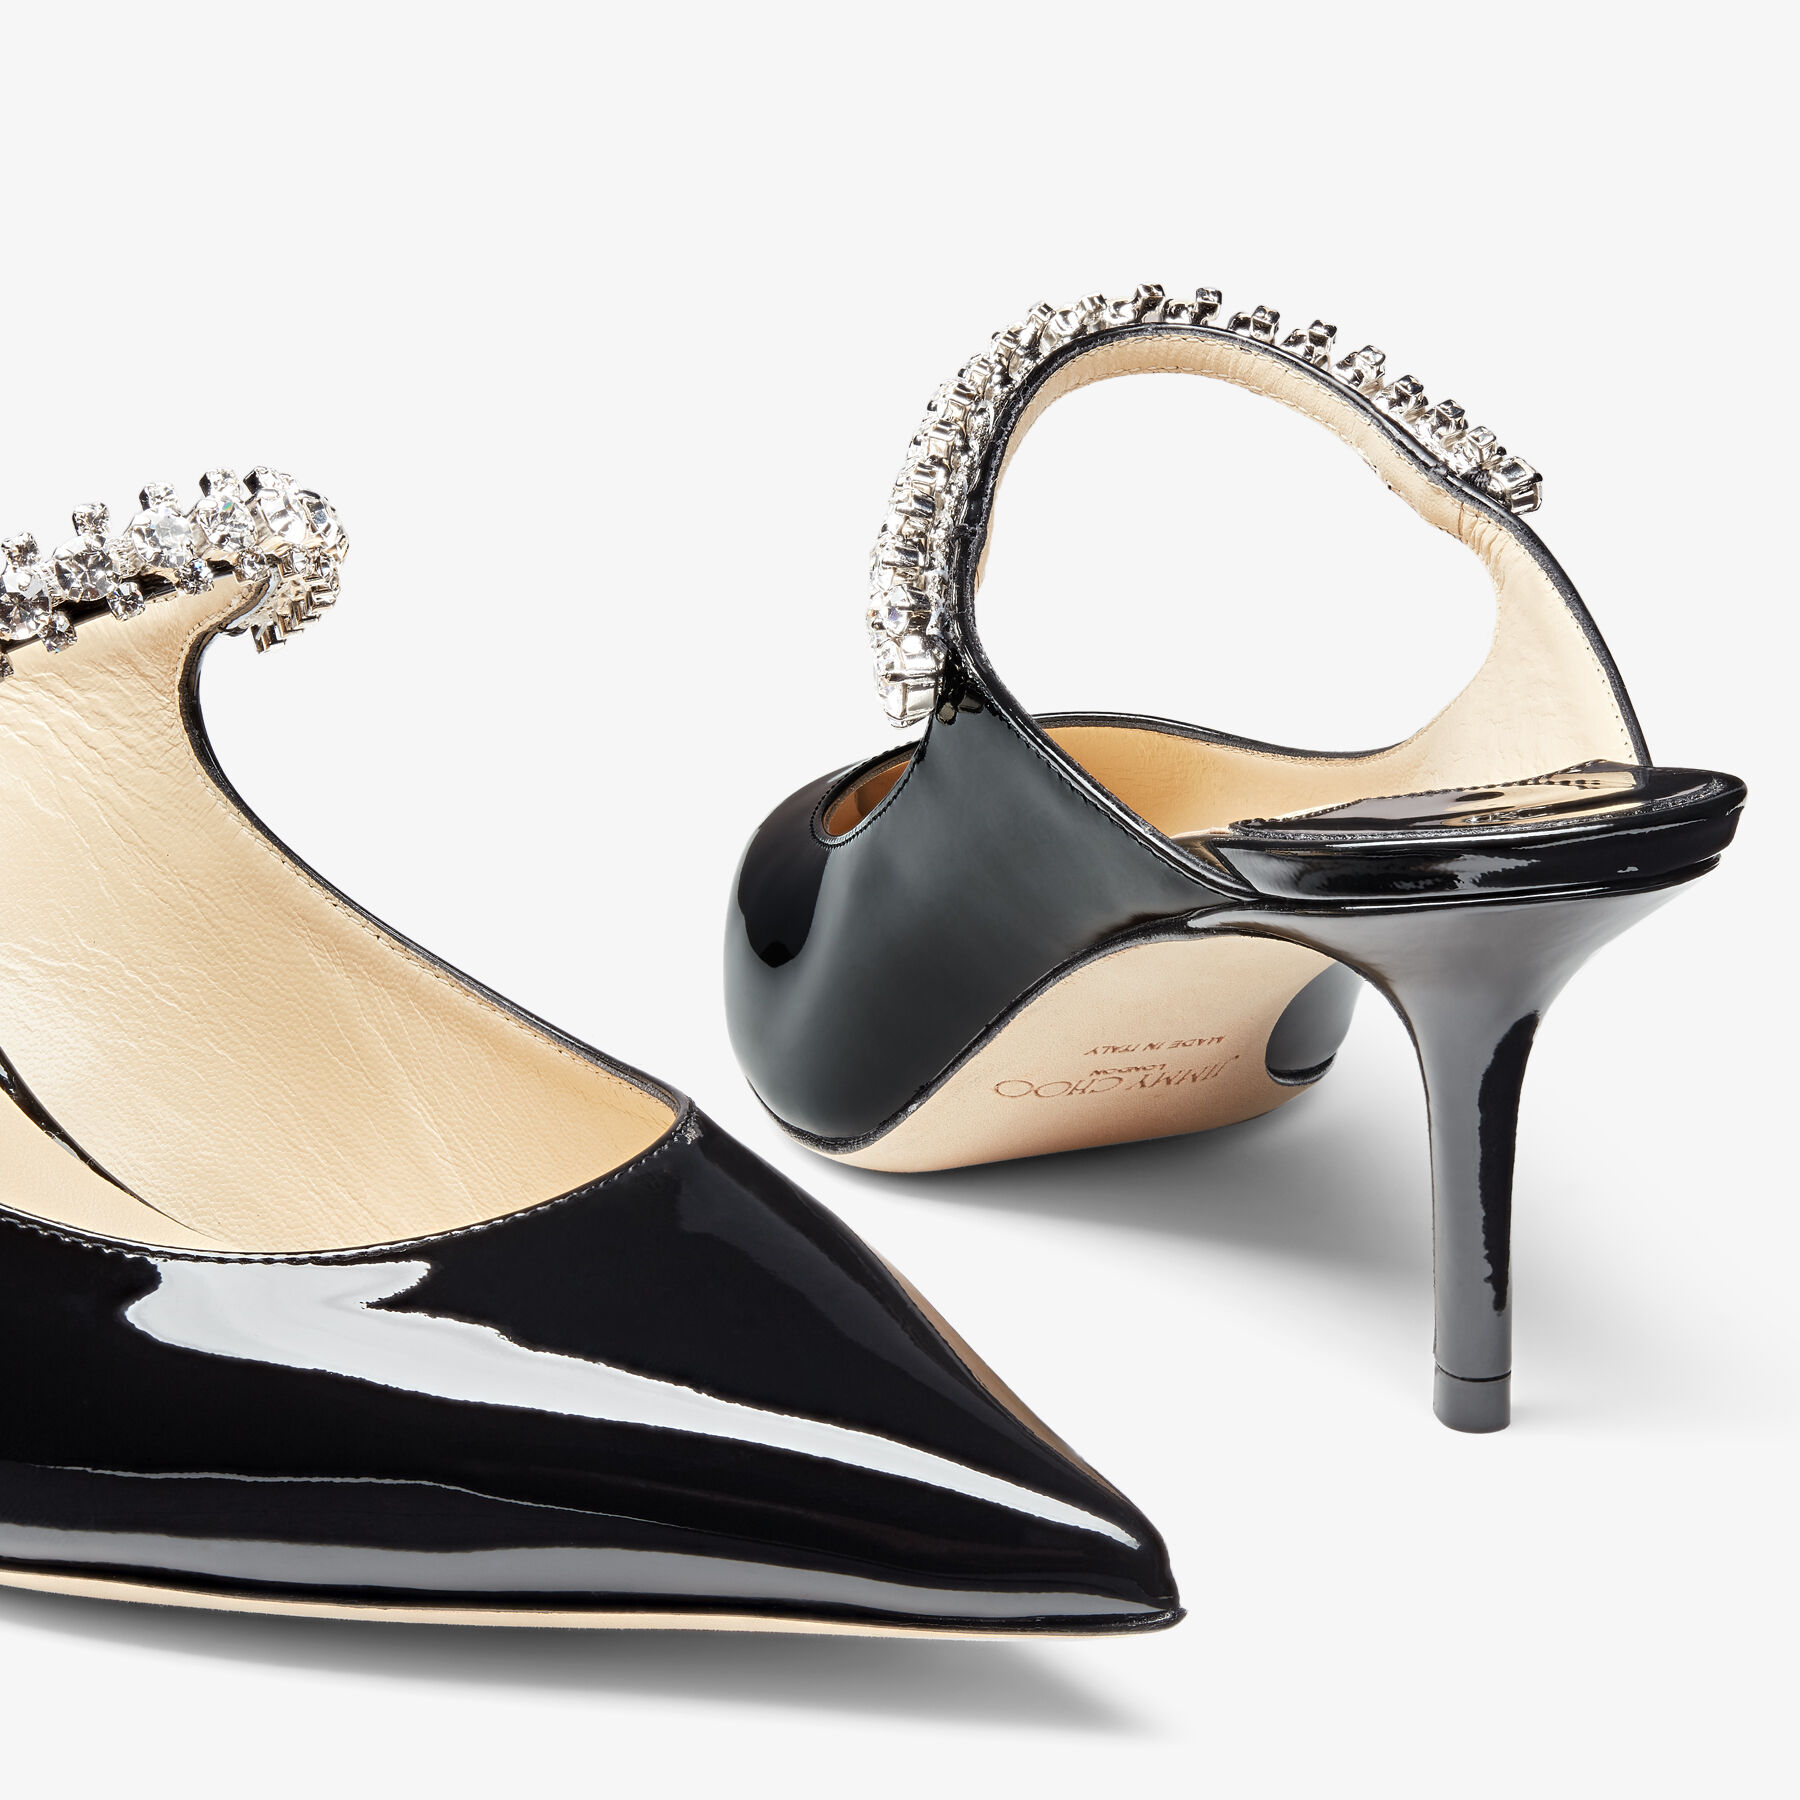 Bing 65 | Black Patent Leather Mules with Crystal Strap | JIMMY CHOO